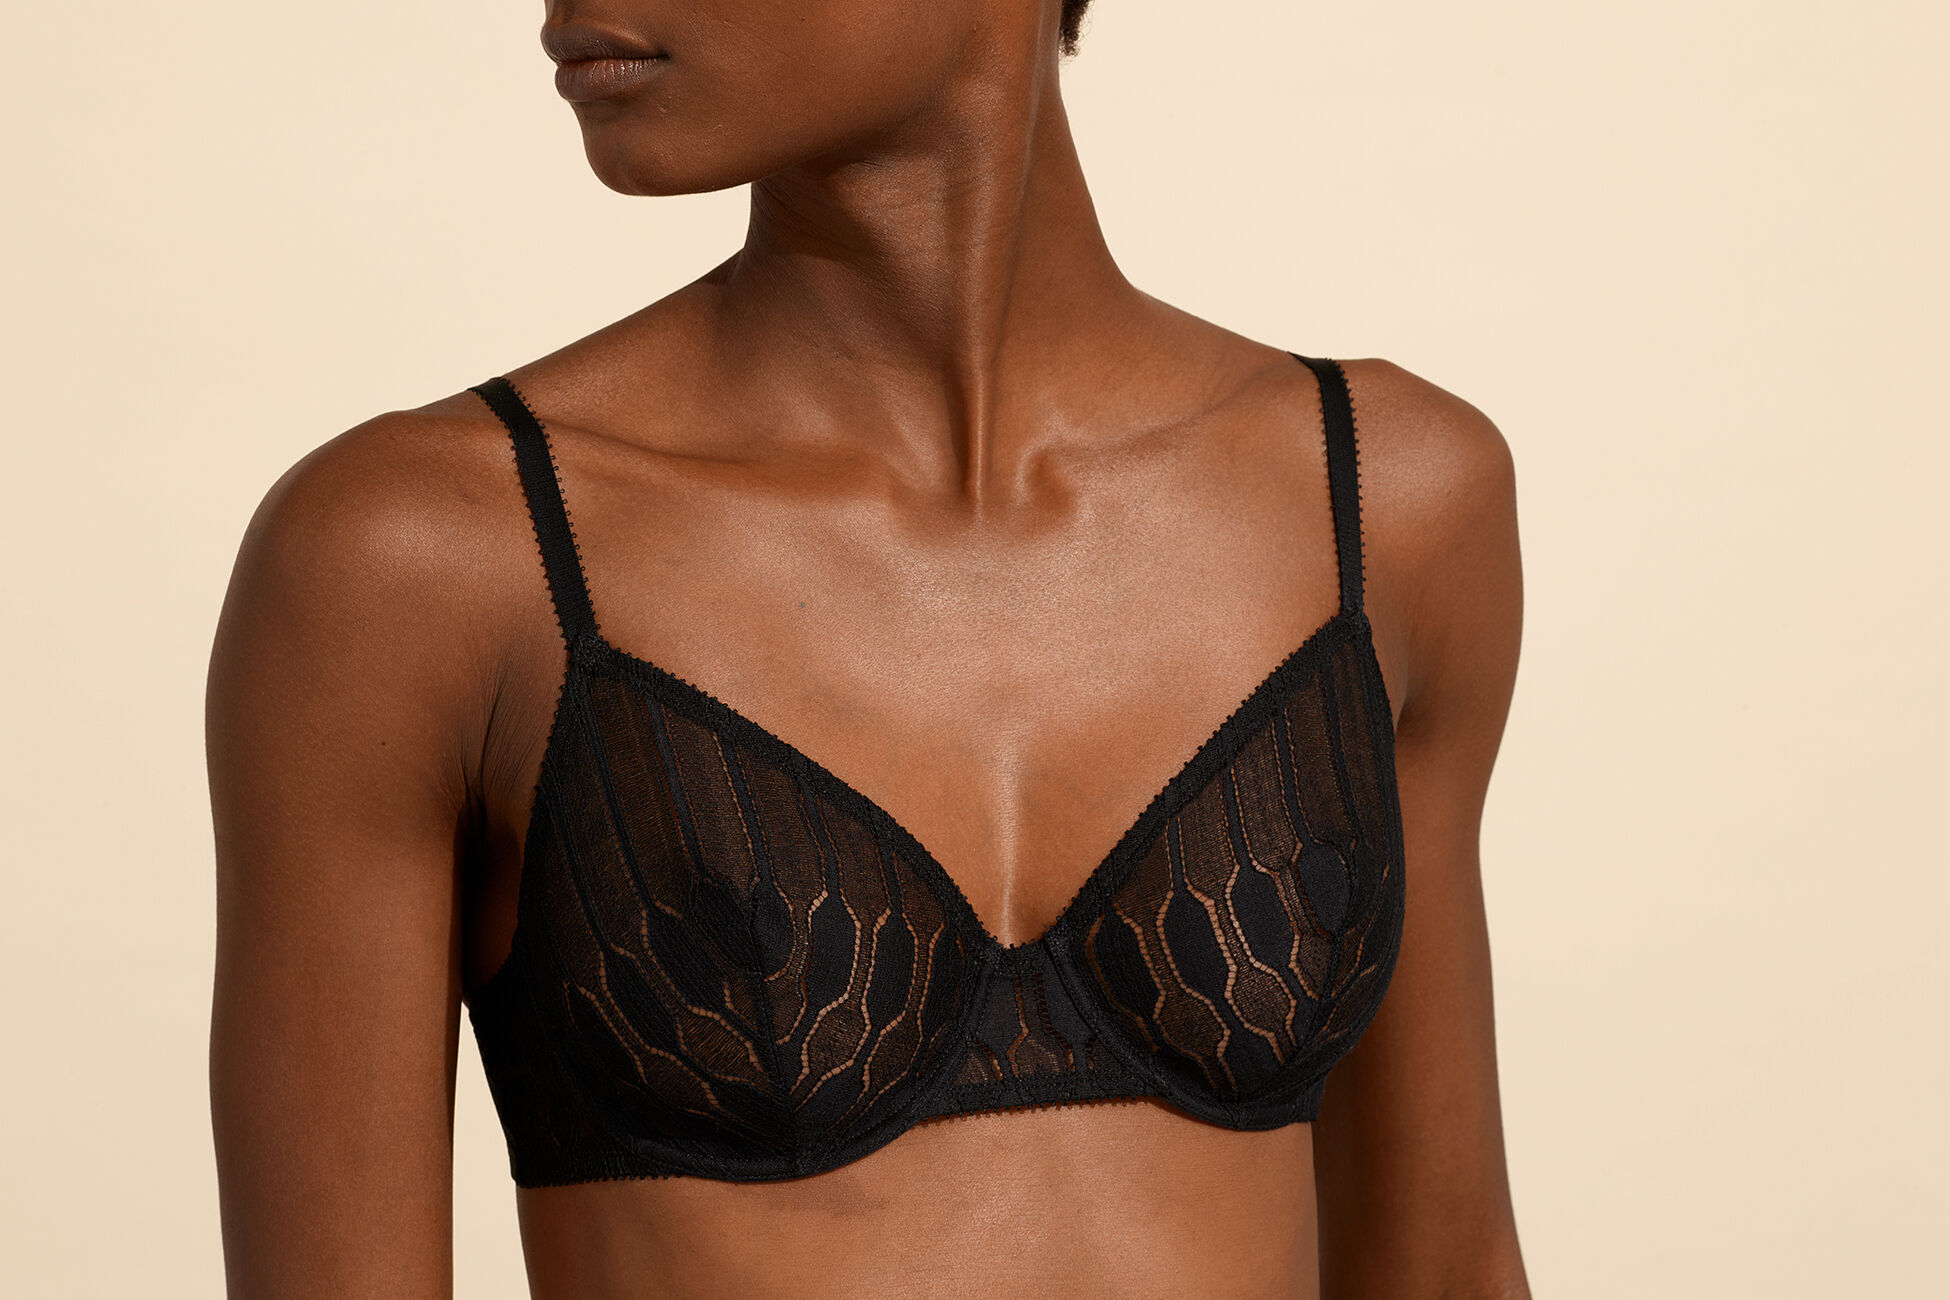 Officielle Full-cup bra standard view �